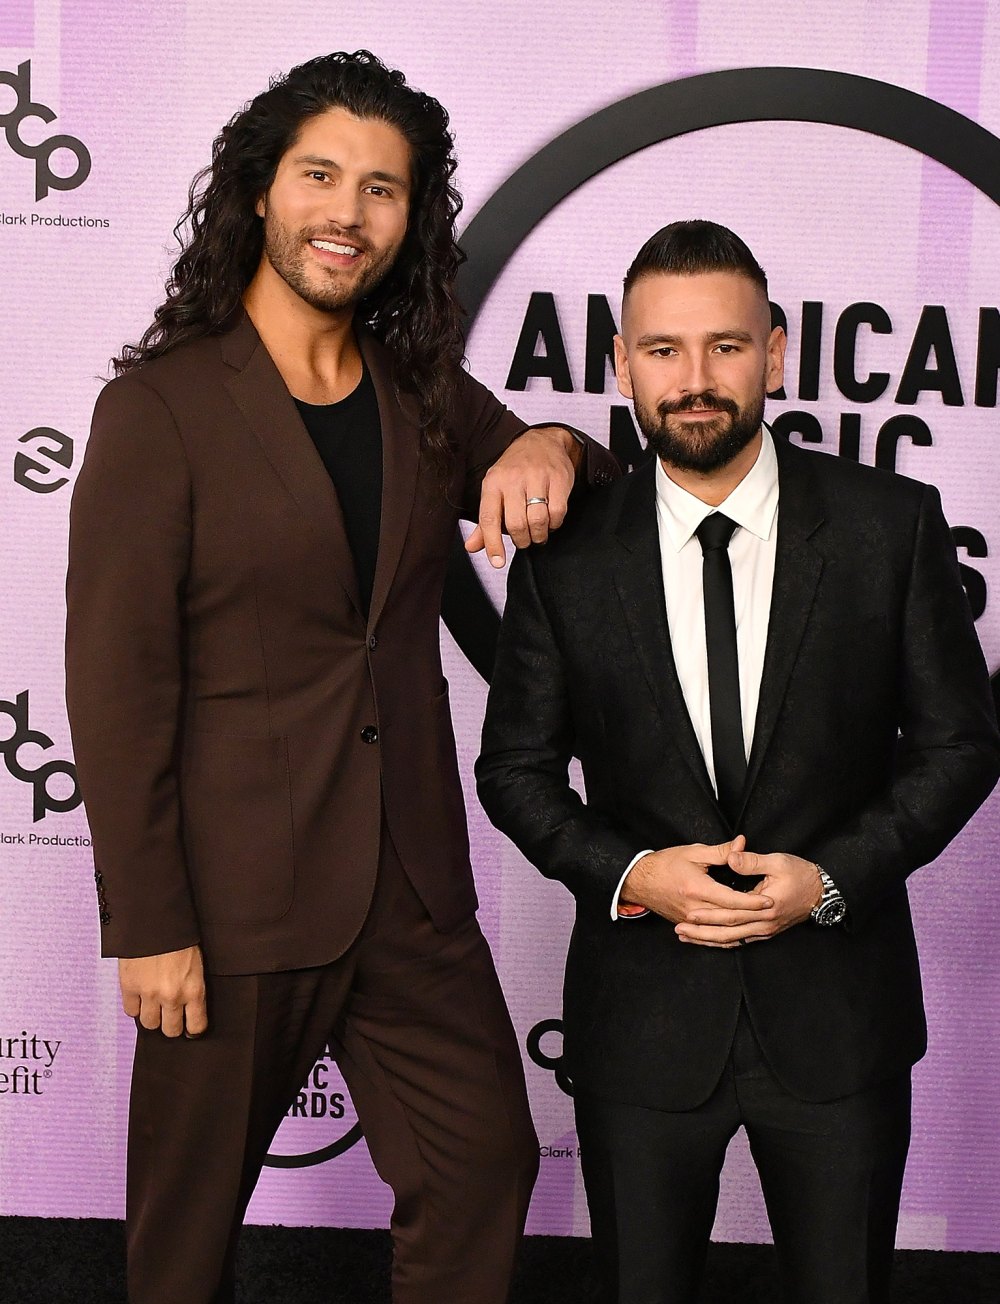 Dan + Shay’s Shay Mooney Reflects on 50-Pound Weight Loss: ‘It’s Weird Not Recognizing Yourself’